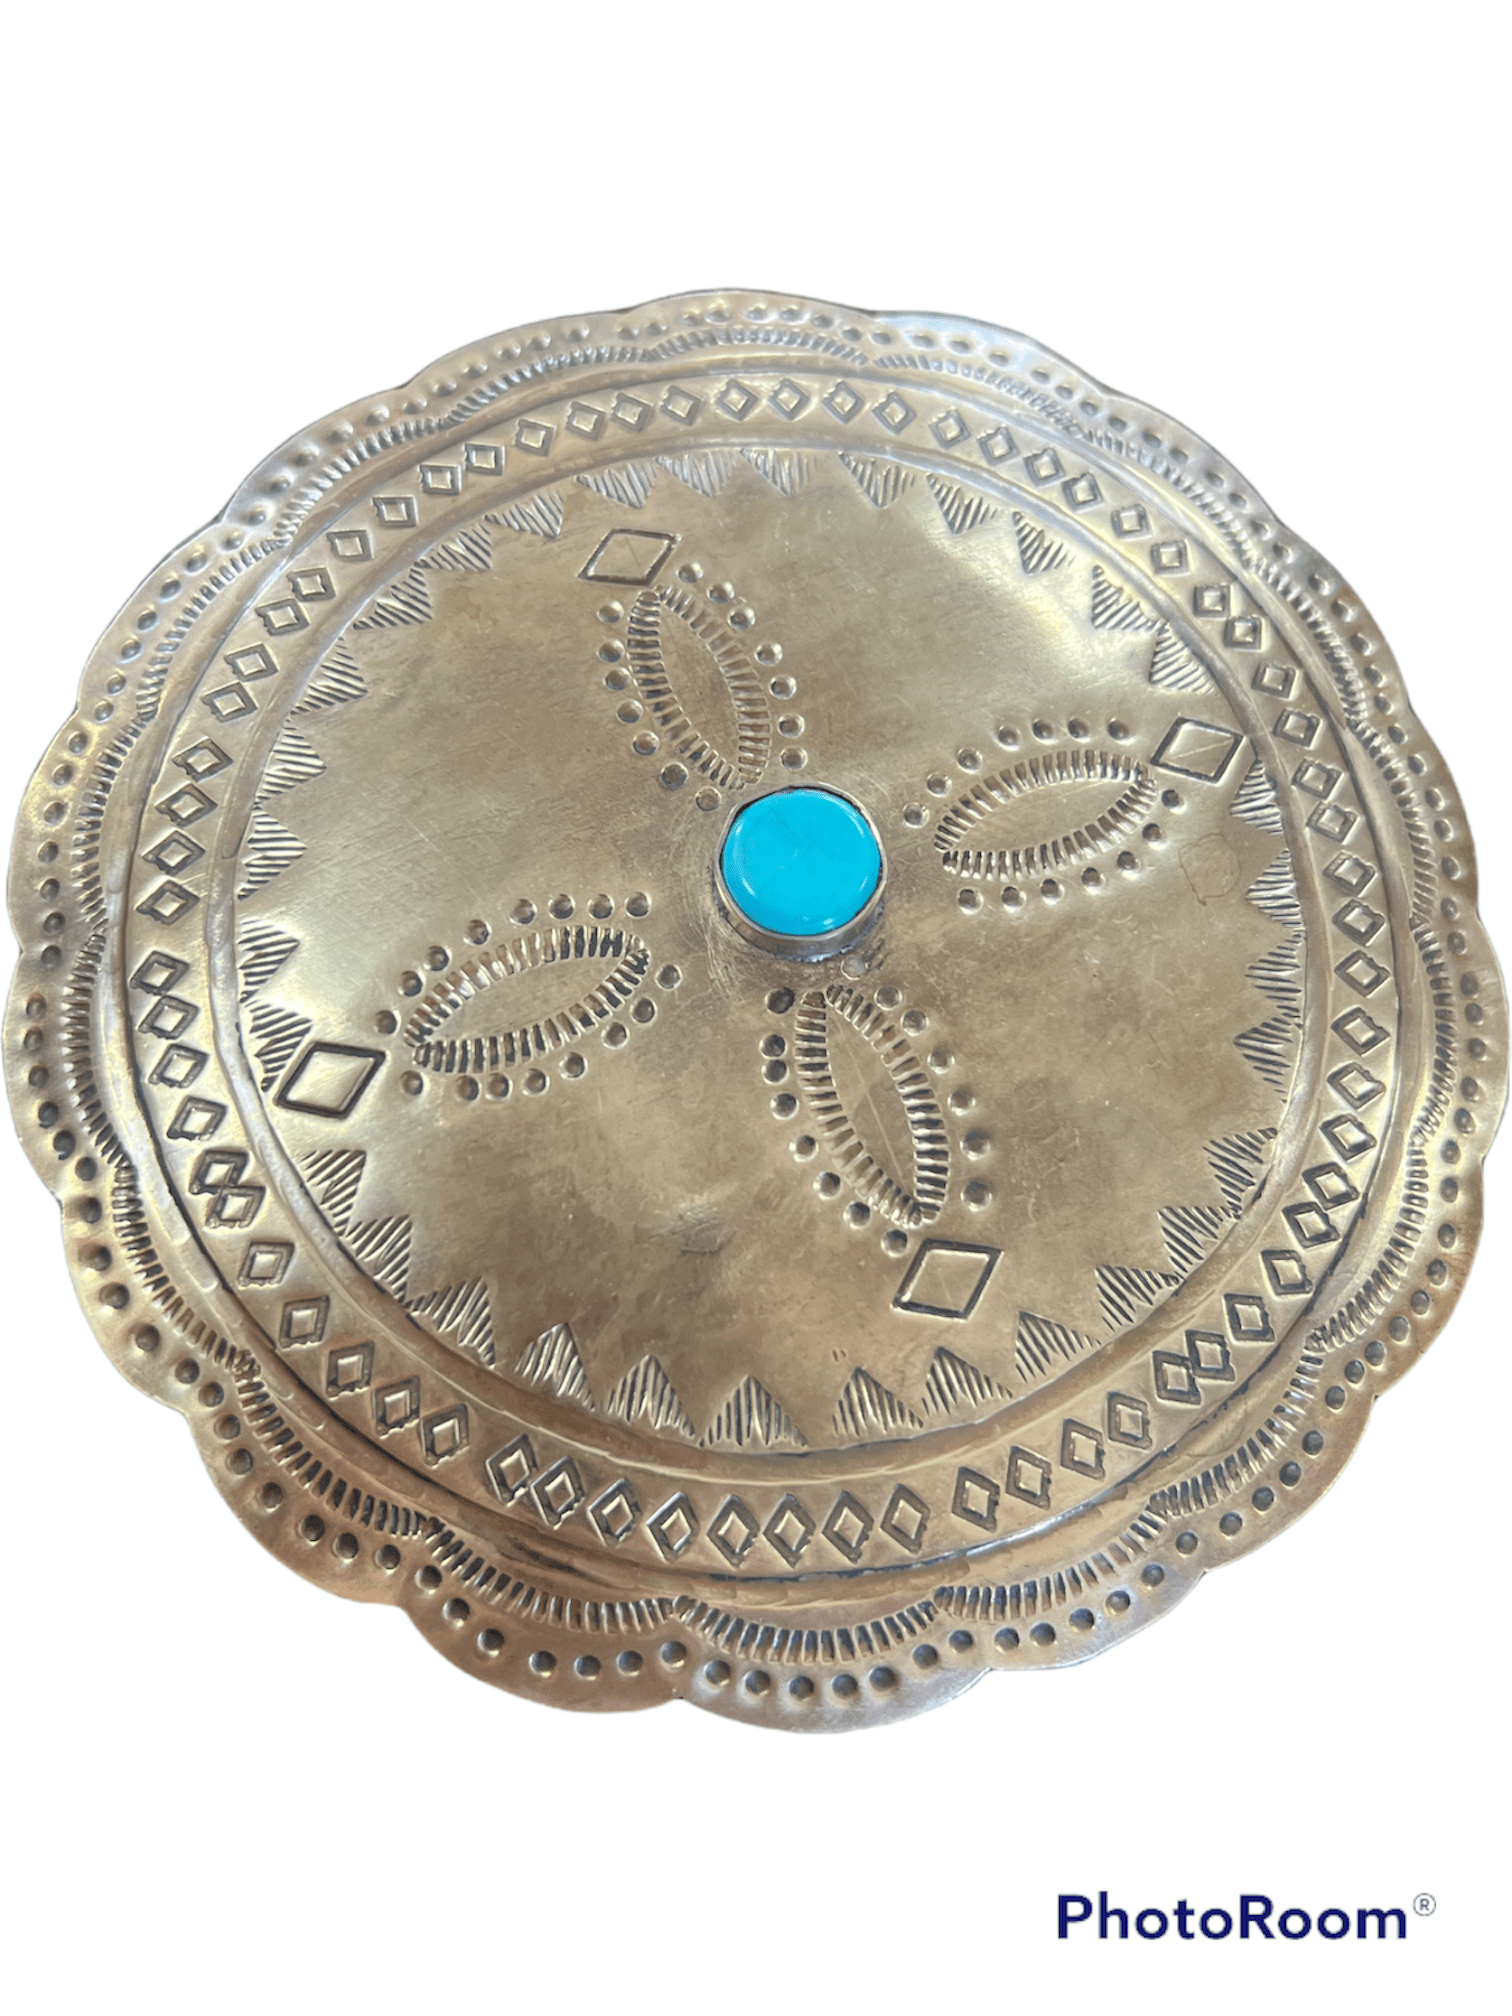 Brand of Bliss Round Rustic Turquoise Jewelry Box